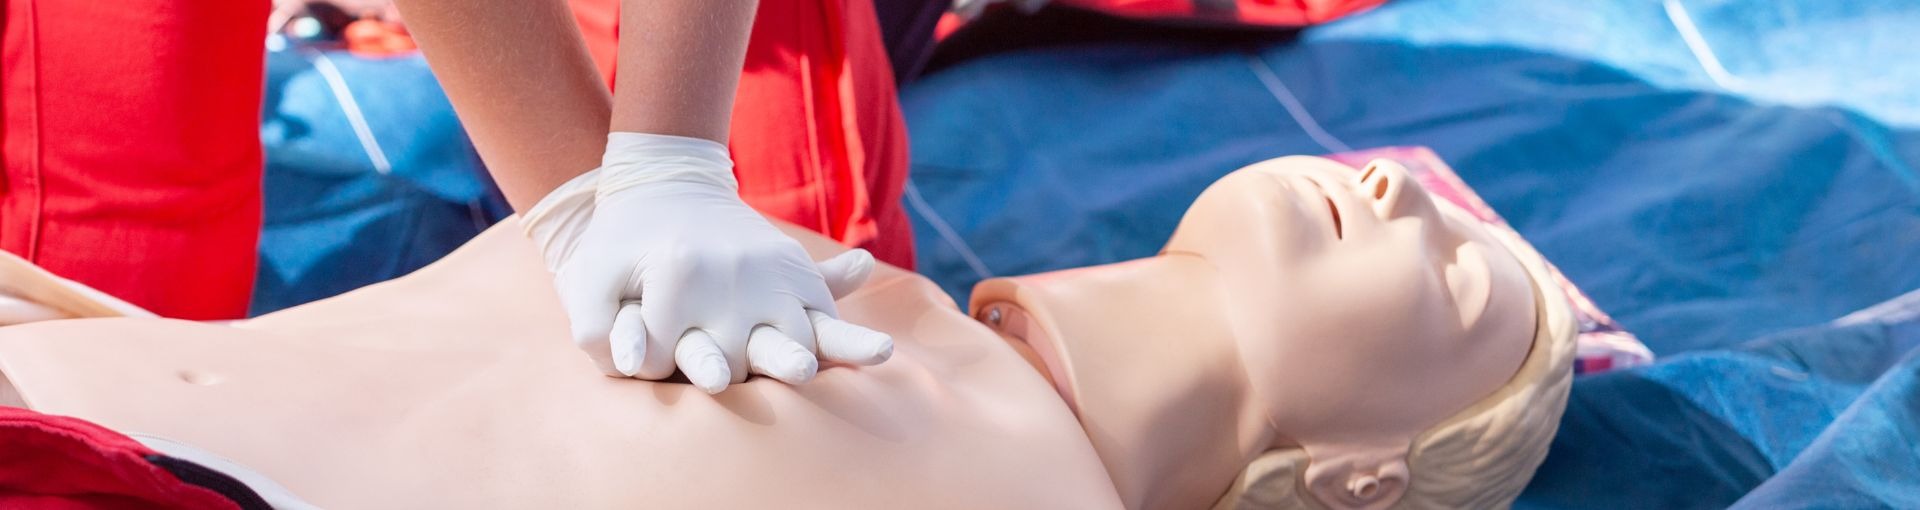 What is CPR?